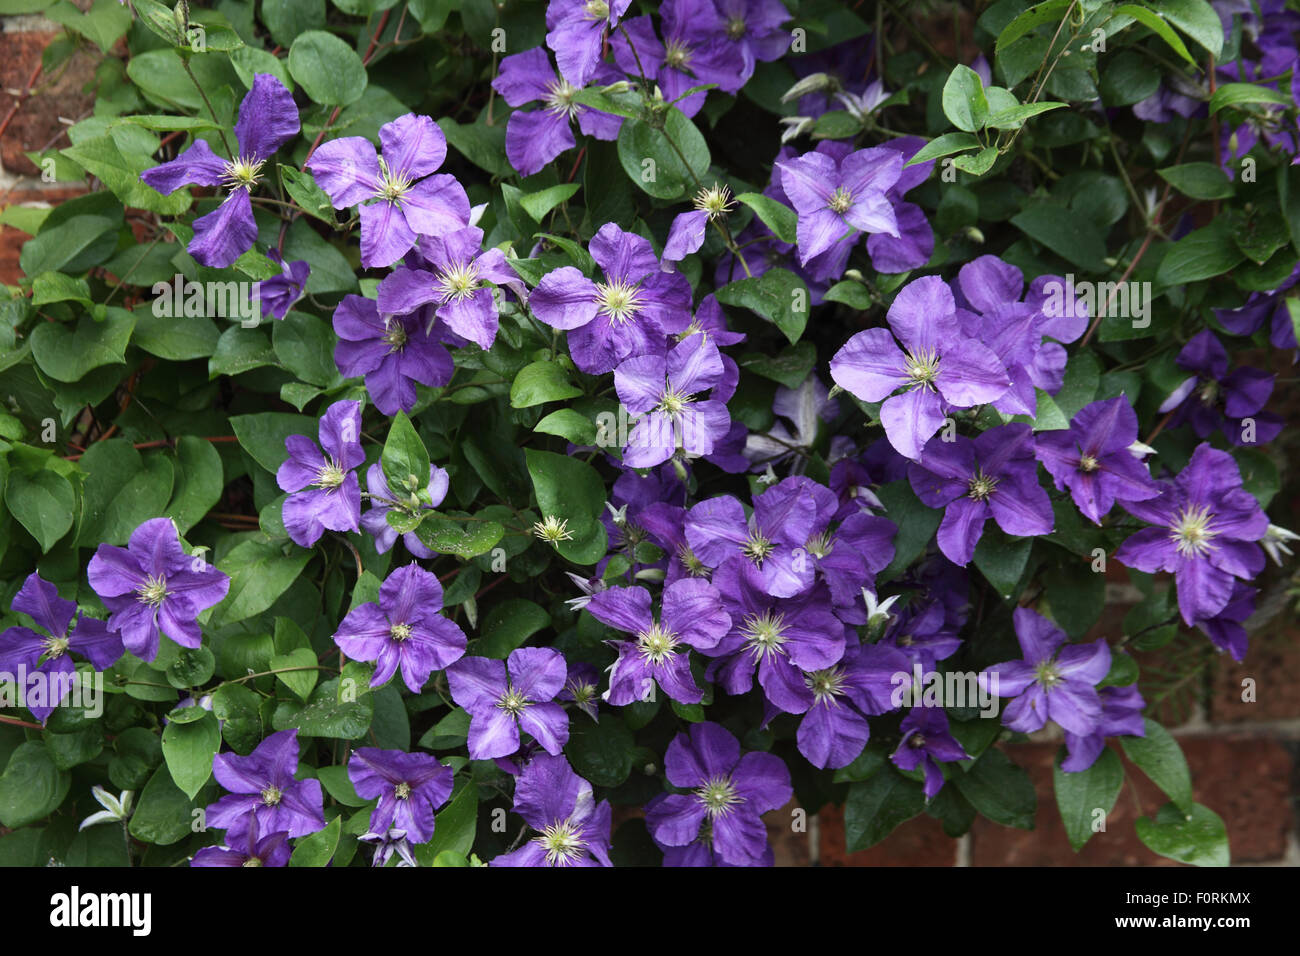 Clematis 'Etoile Violette' plant in flower Stock Photo